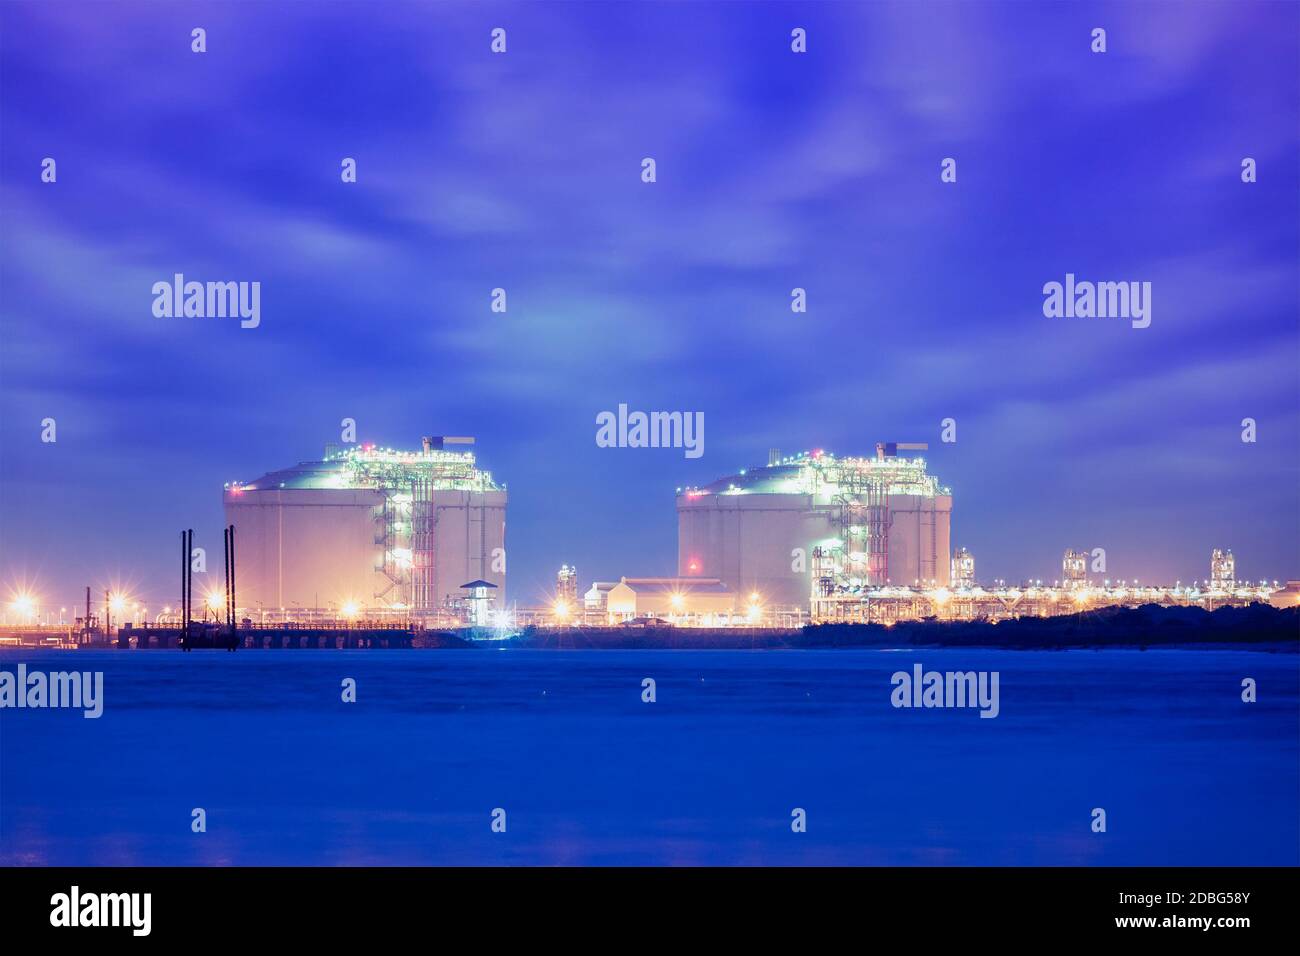 Industrial liquified natural gas (LNG) reservoir tanks in sea port in twilight Stock Photo